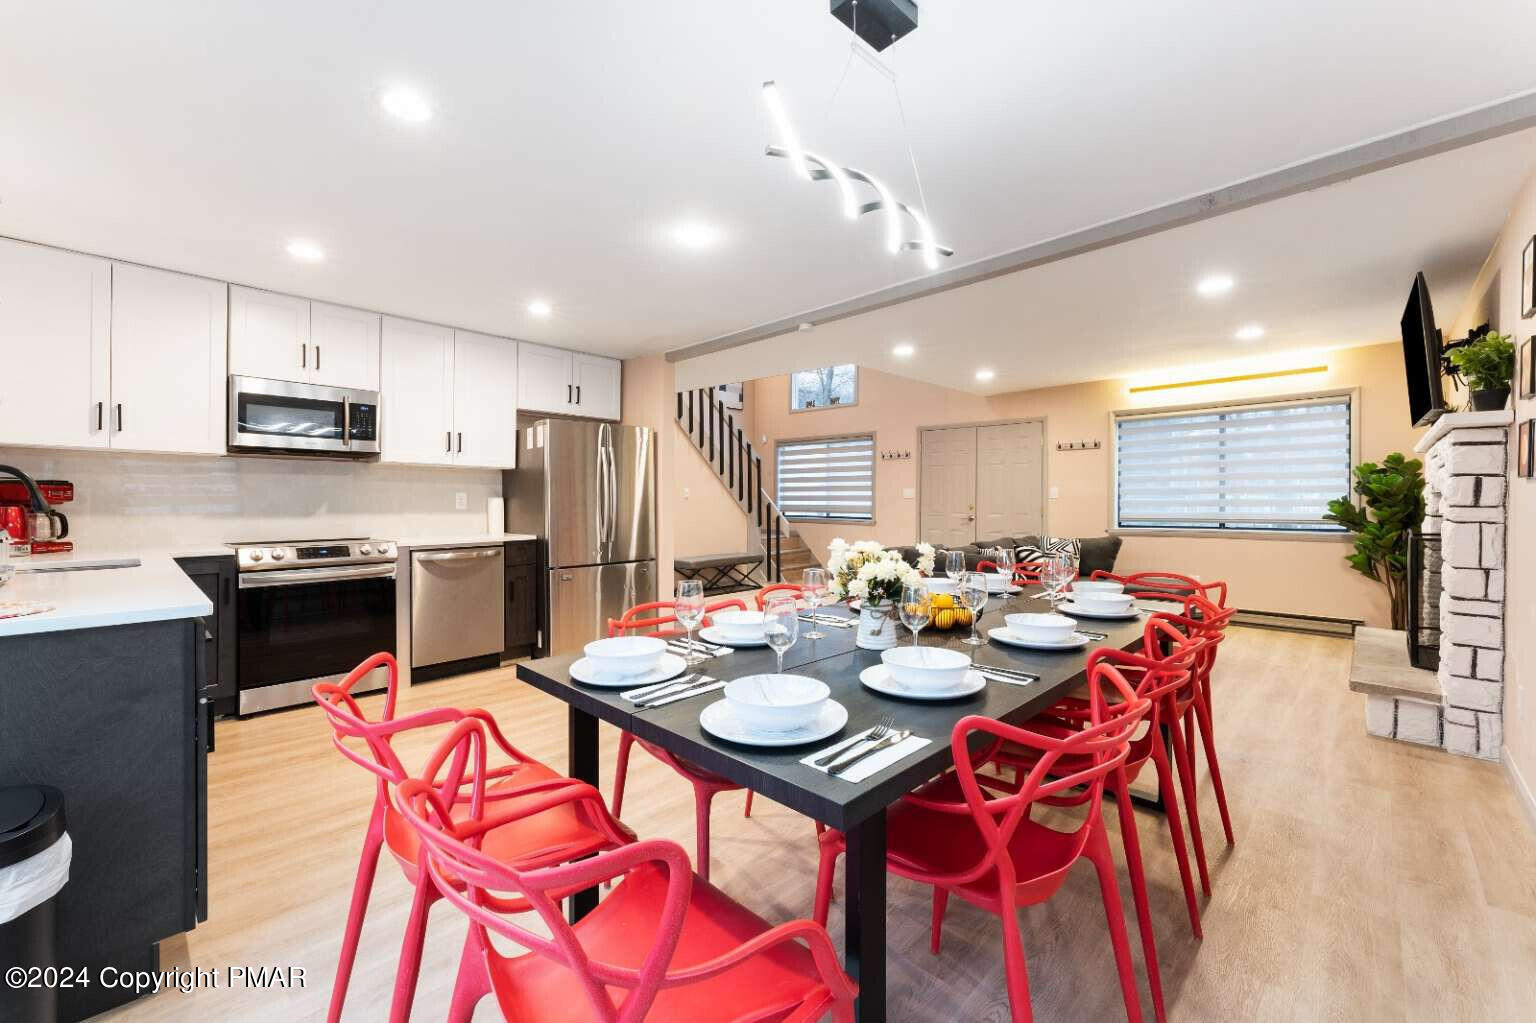 a open dining room with stainless steel appliances kitchen island granite countertop a dining table chairs and a refrigerator